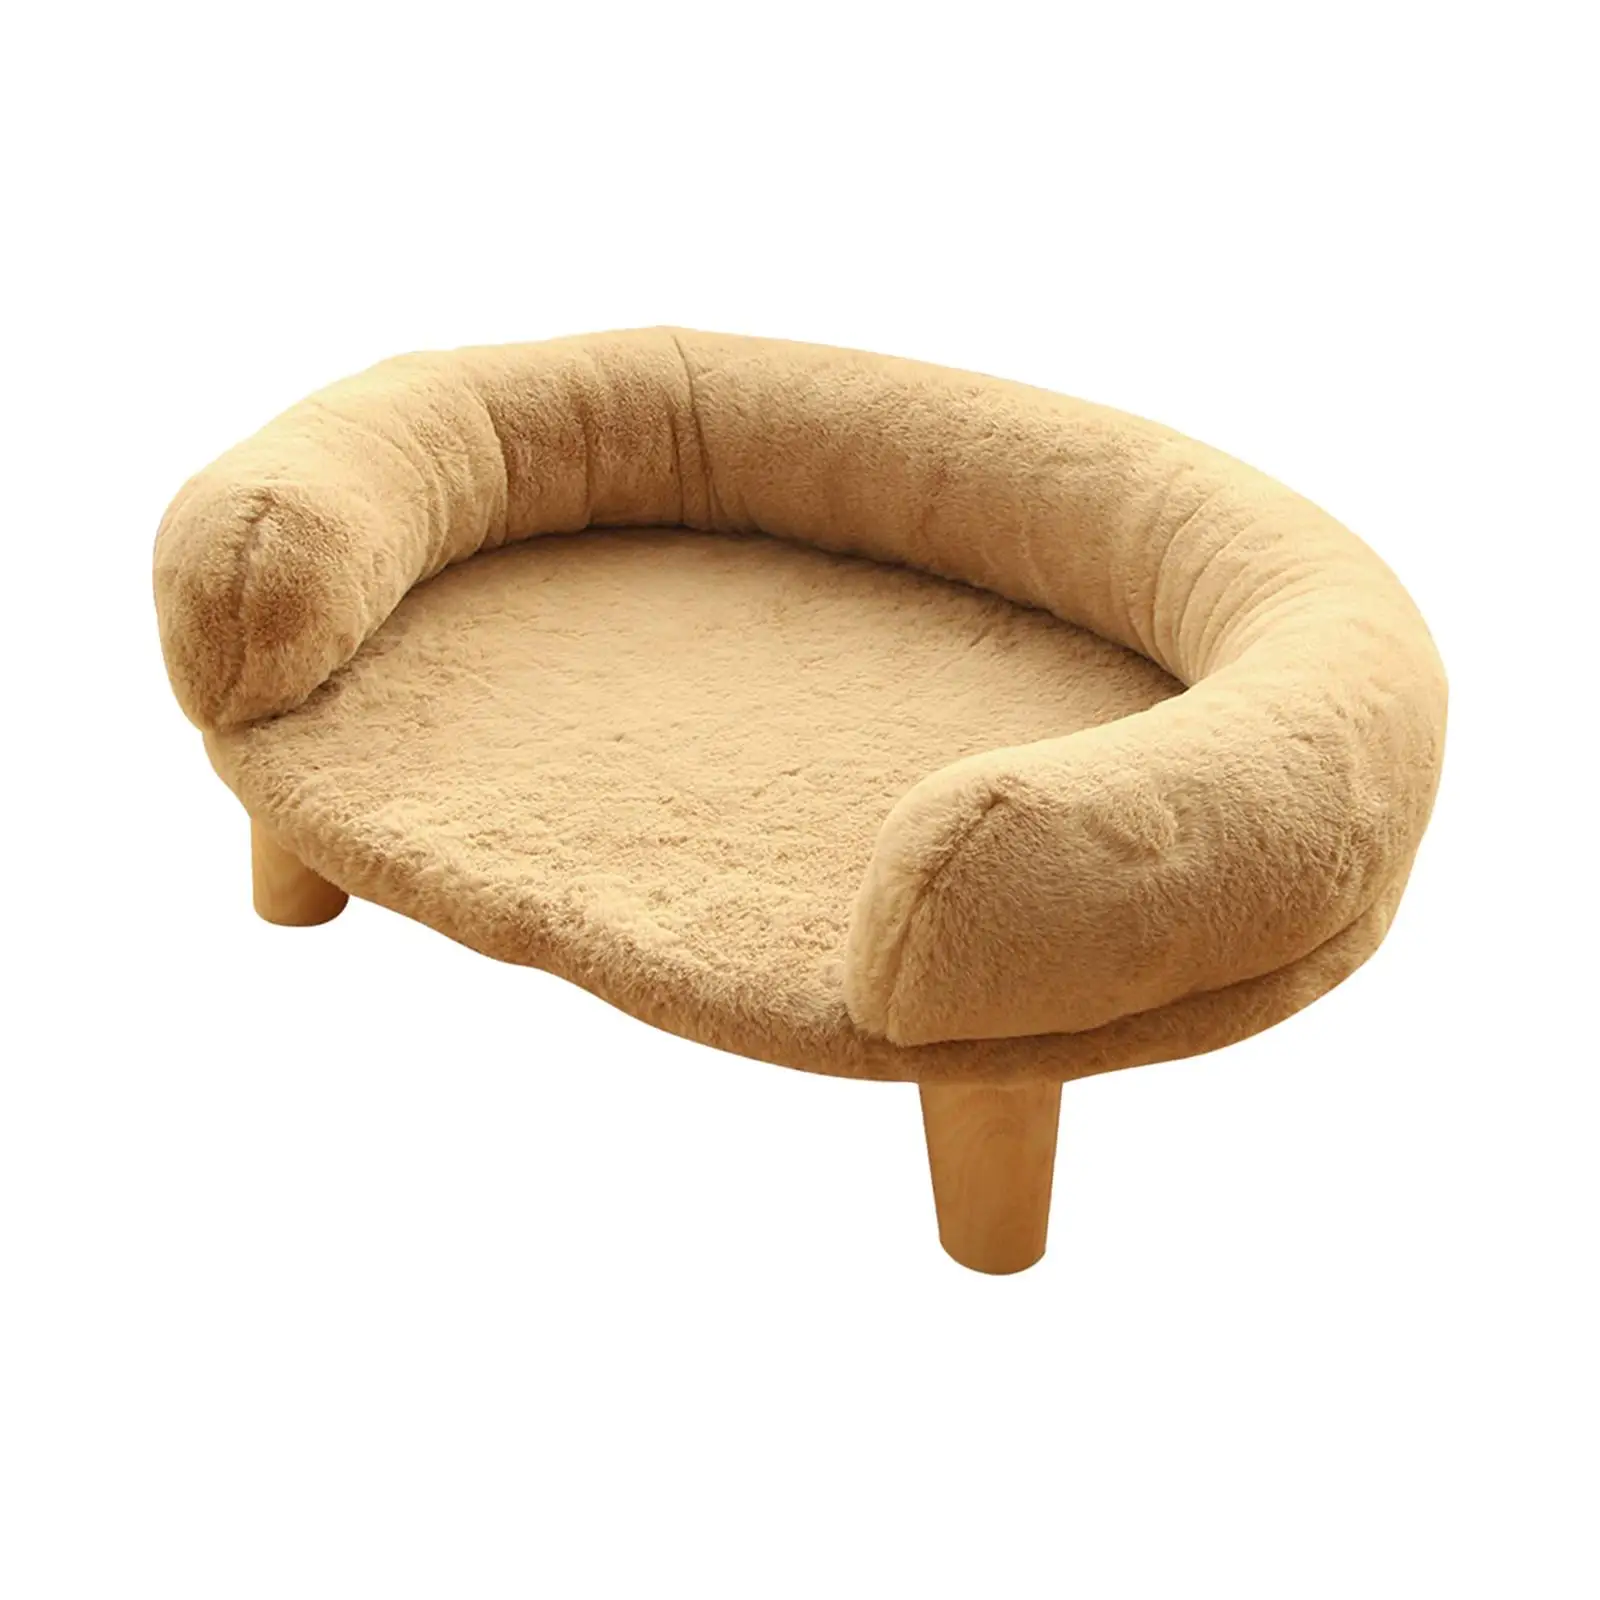 Cats Warm Couch Anti Slip Legs Soft Pet Bed for Puppy Small Medium Dog Kitty